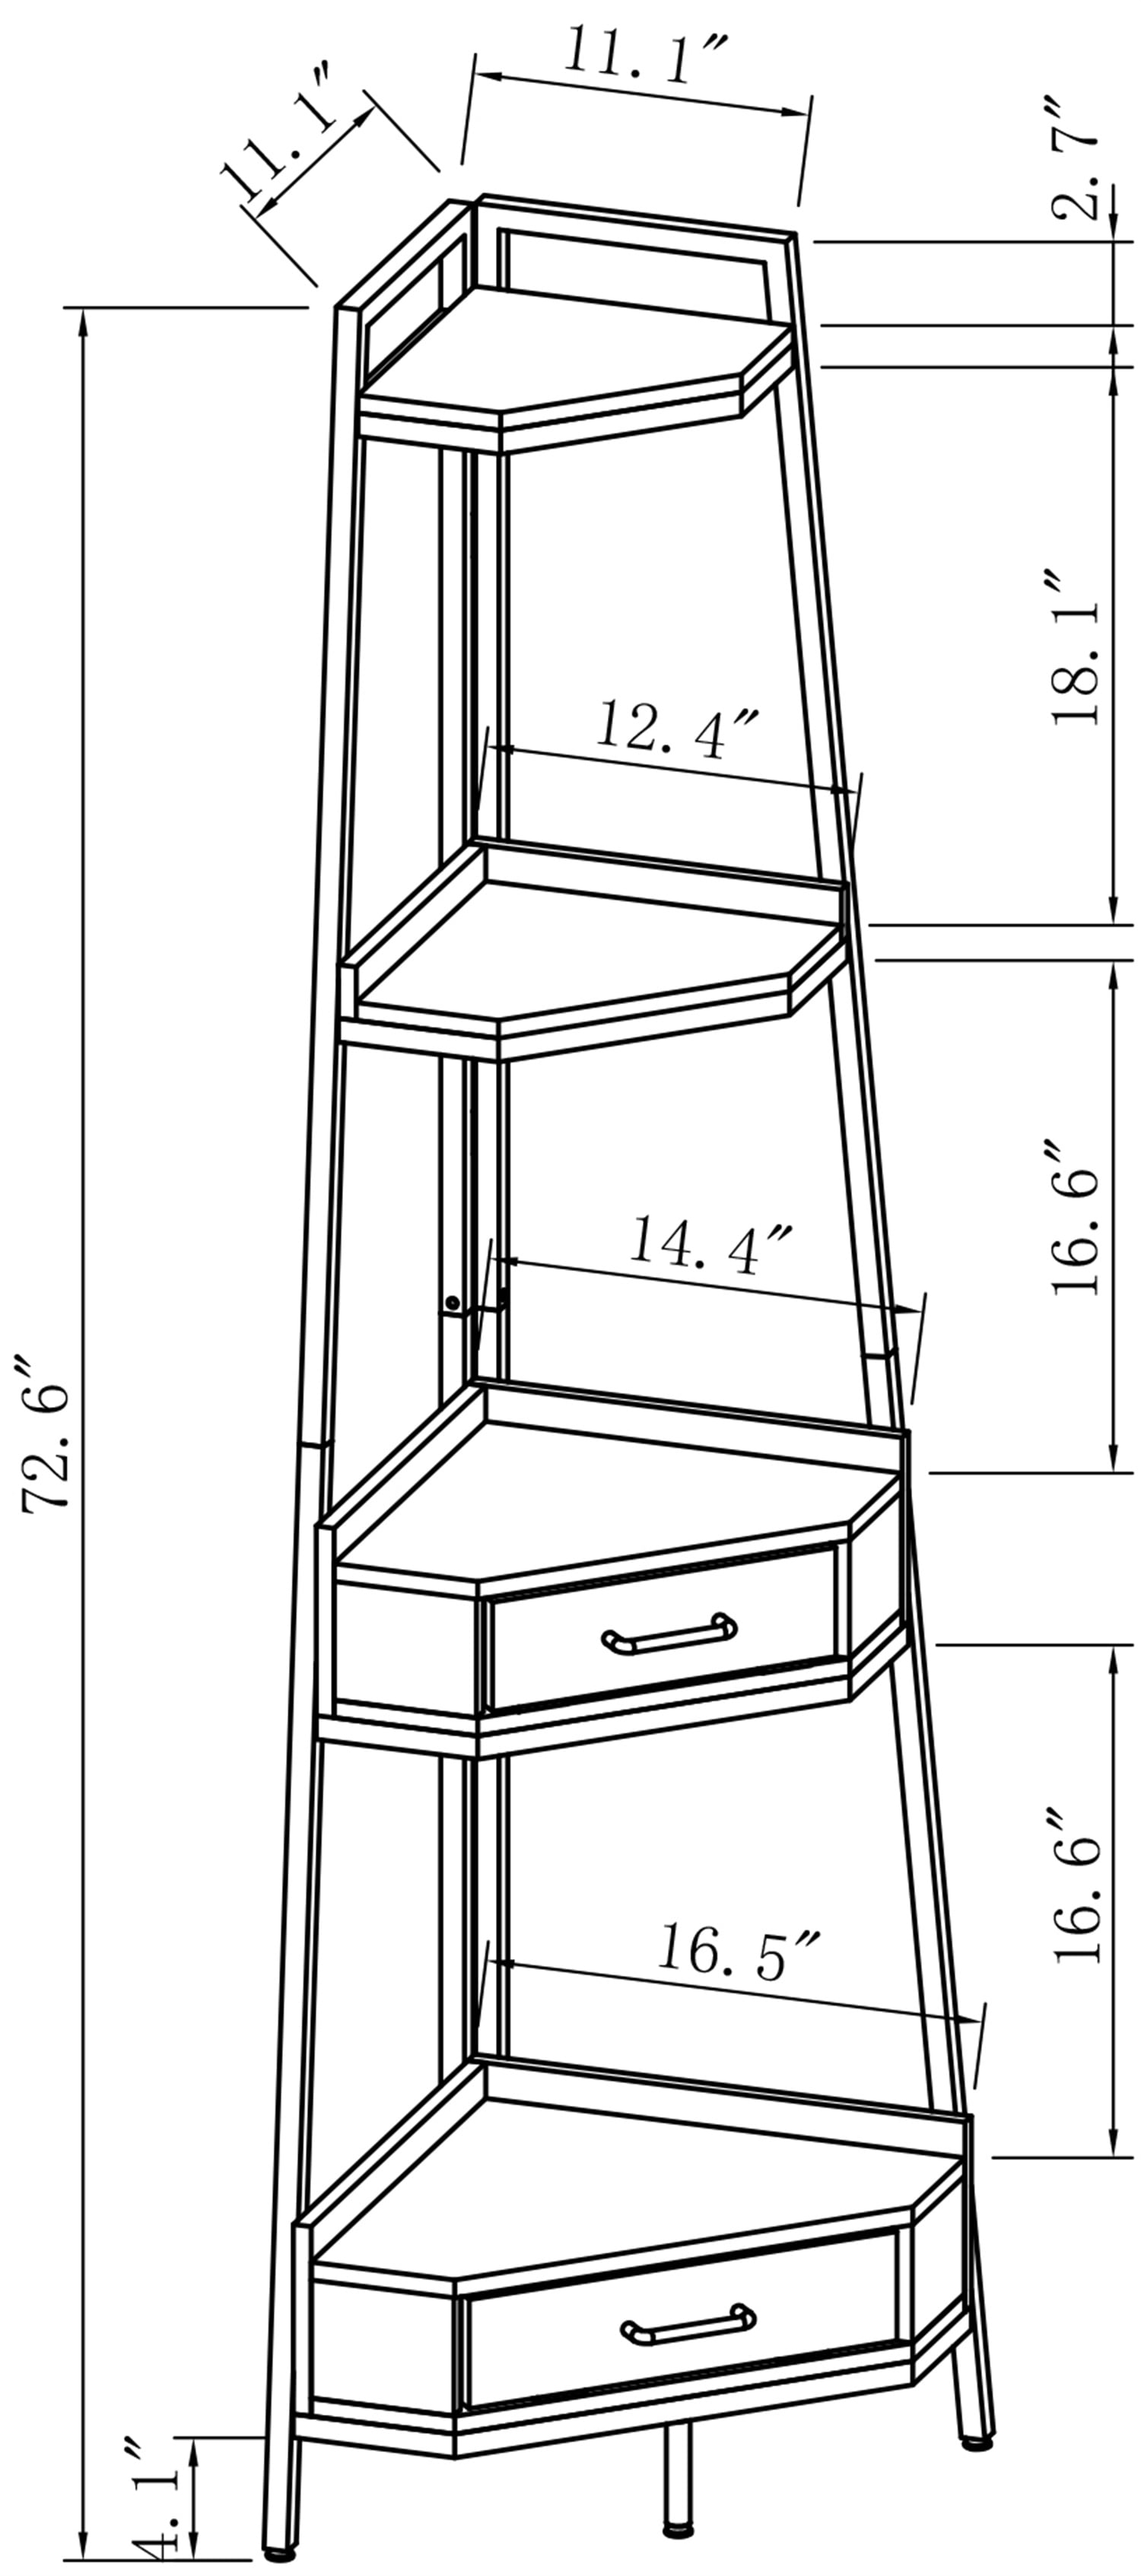 Dropship Corner Shelf, 4 Tier Bamboo Corner Bookshelf, 47.2 Inch Tall  Bookcase, Open Ladder Book Case, Modern Bookshelf Stand In Living Room,  Bedroom, Office, Kitchen, Balcony, White to Sell Online at a